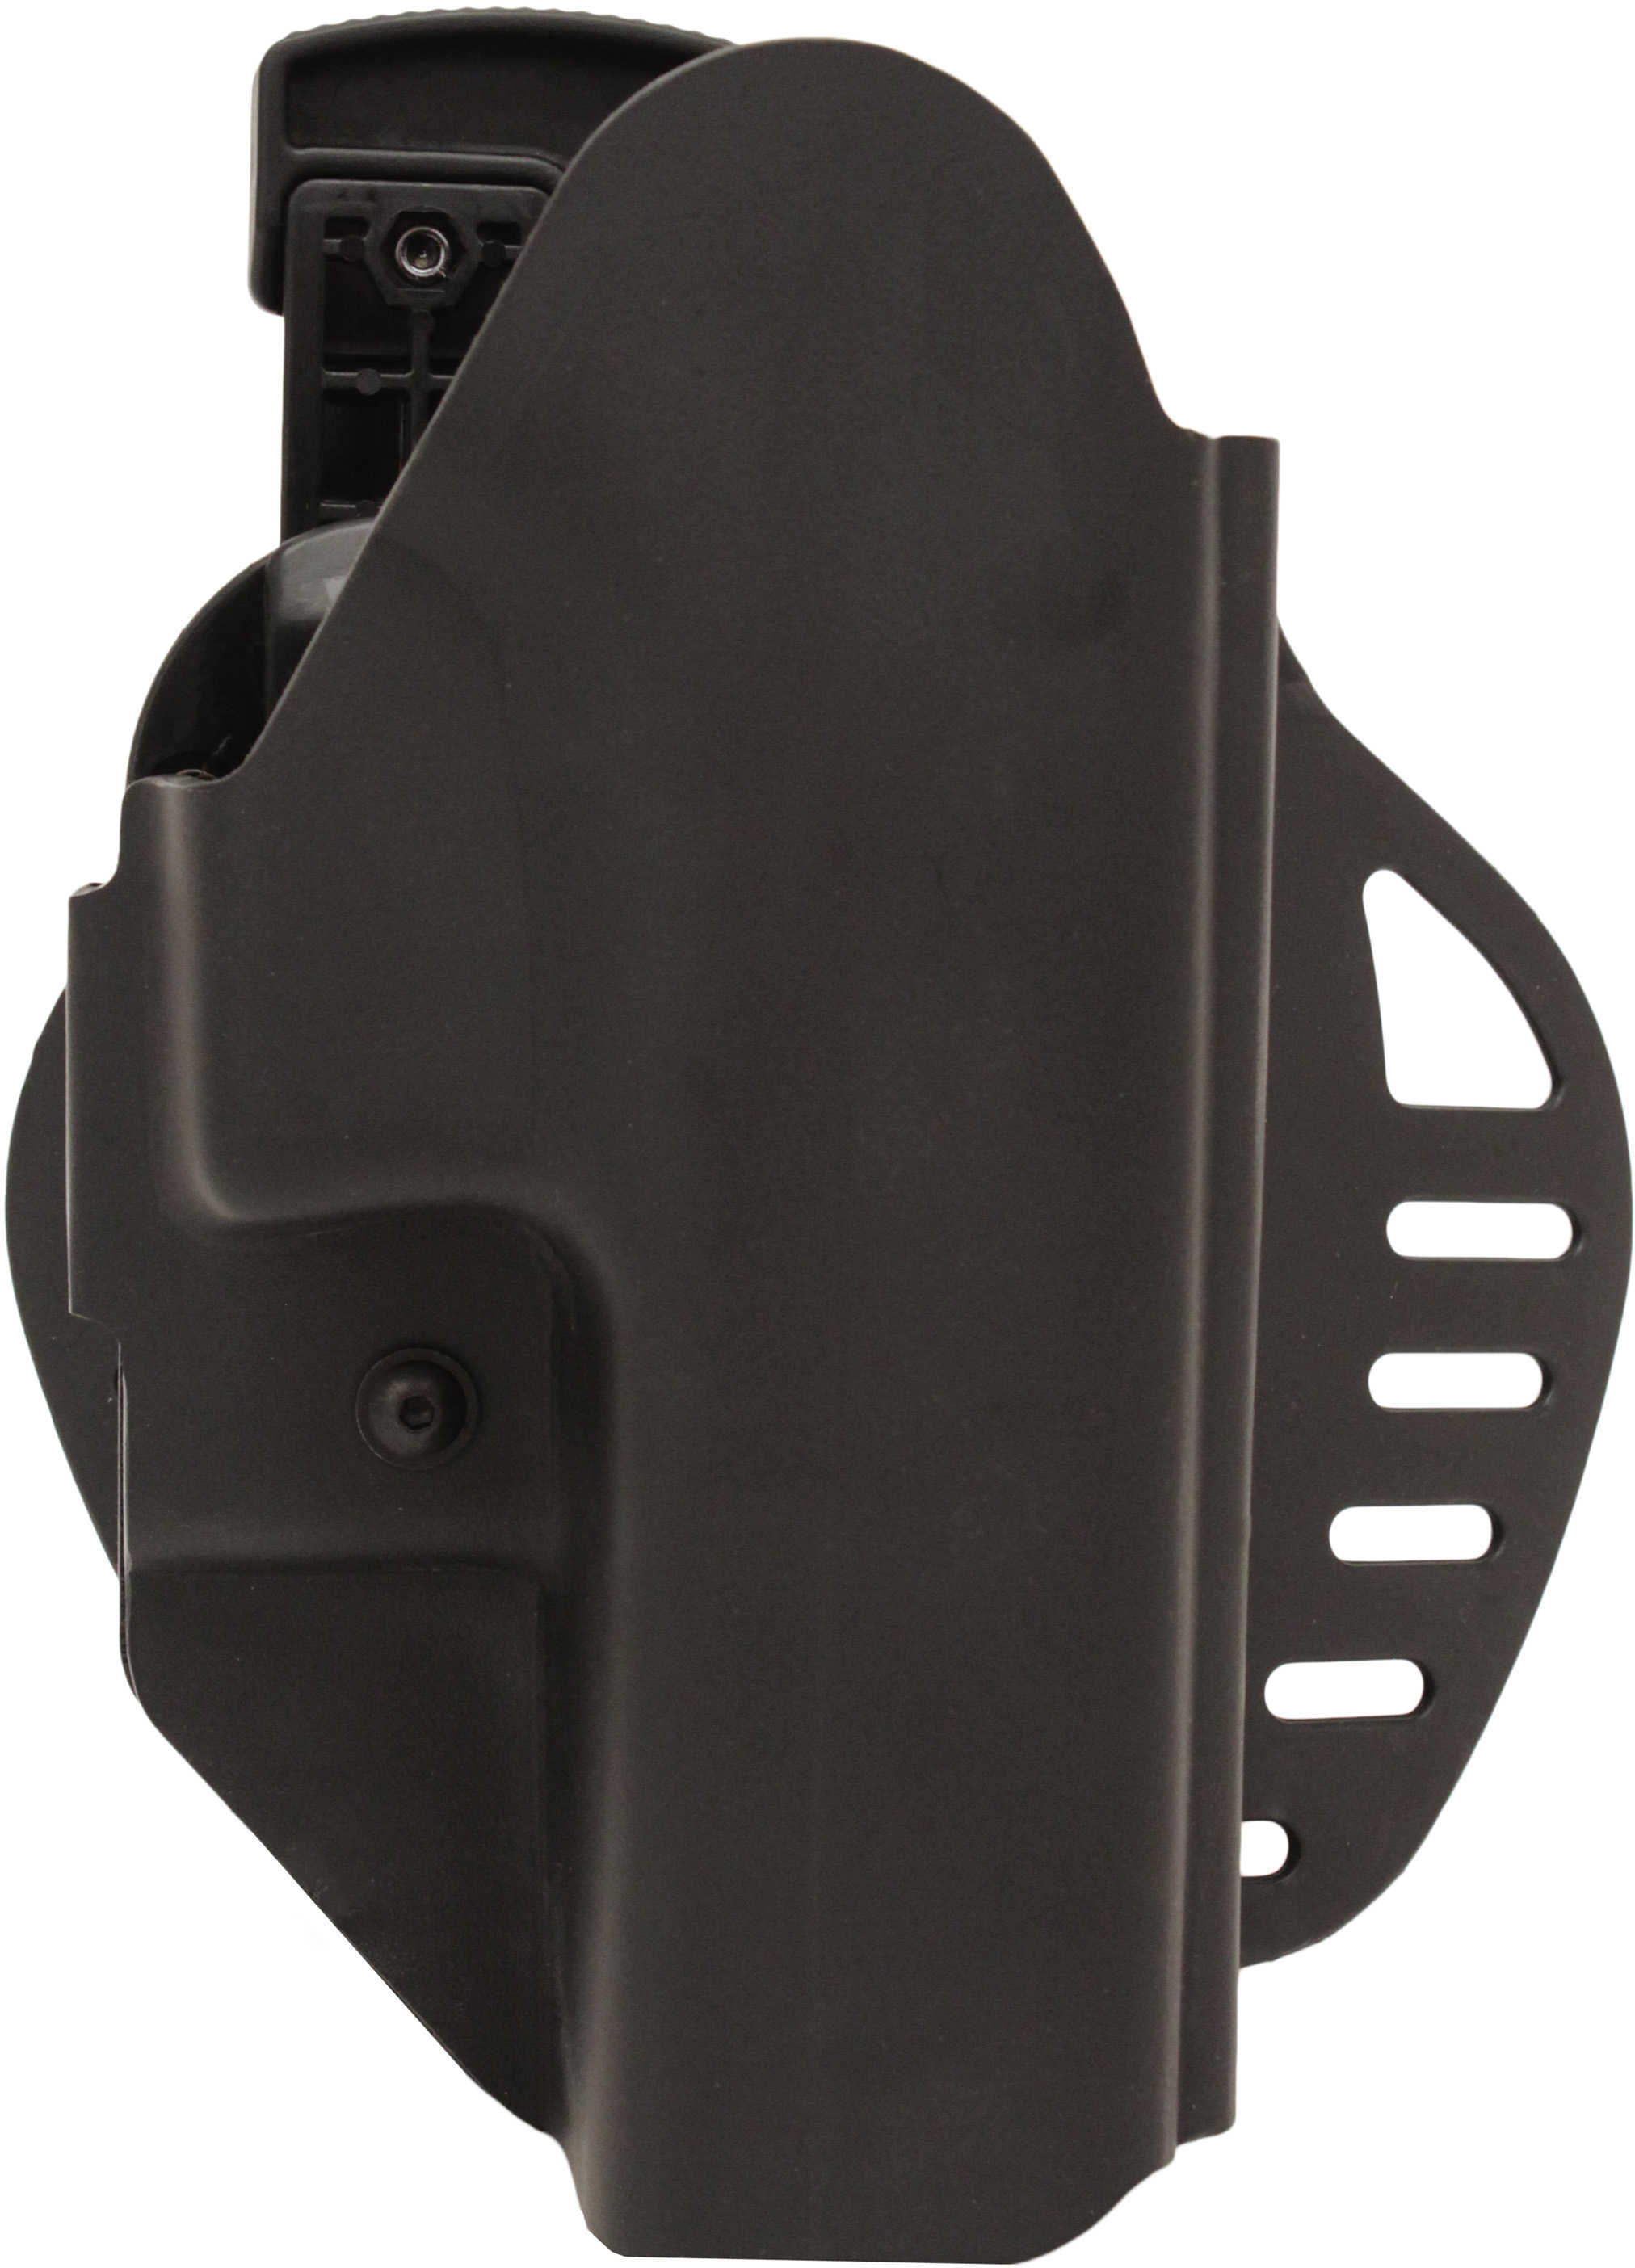 Hogue for Glock 20 Holster Right Hand, Black 52020